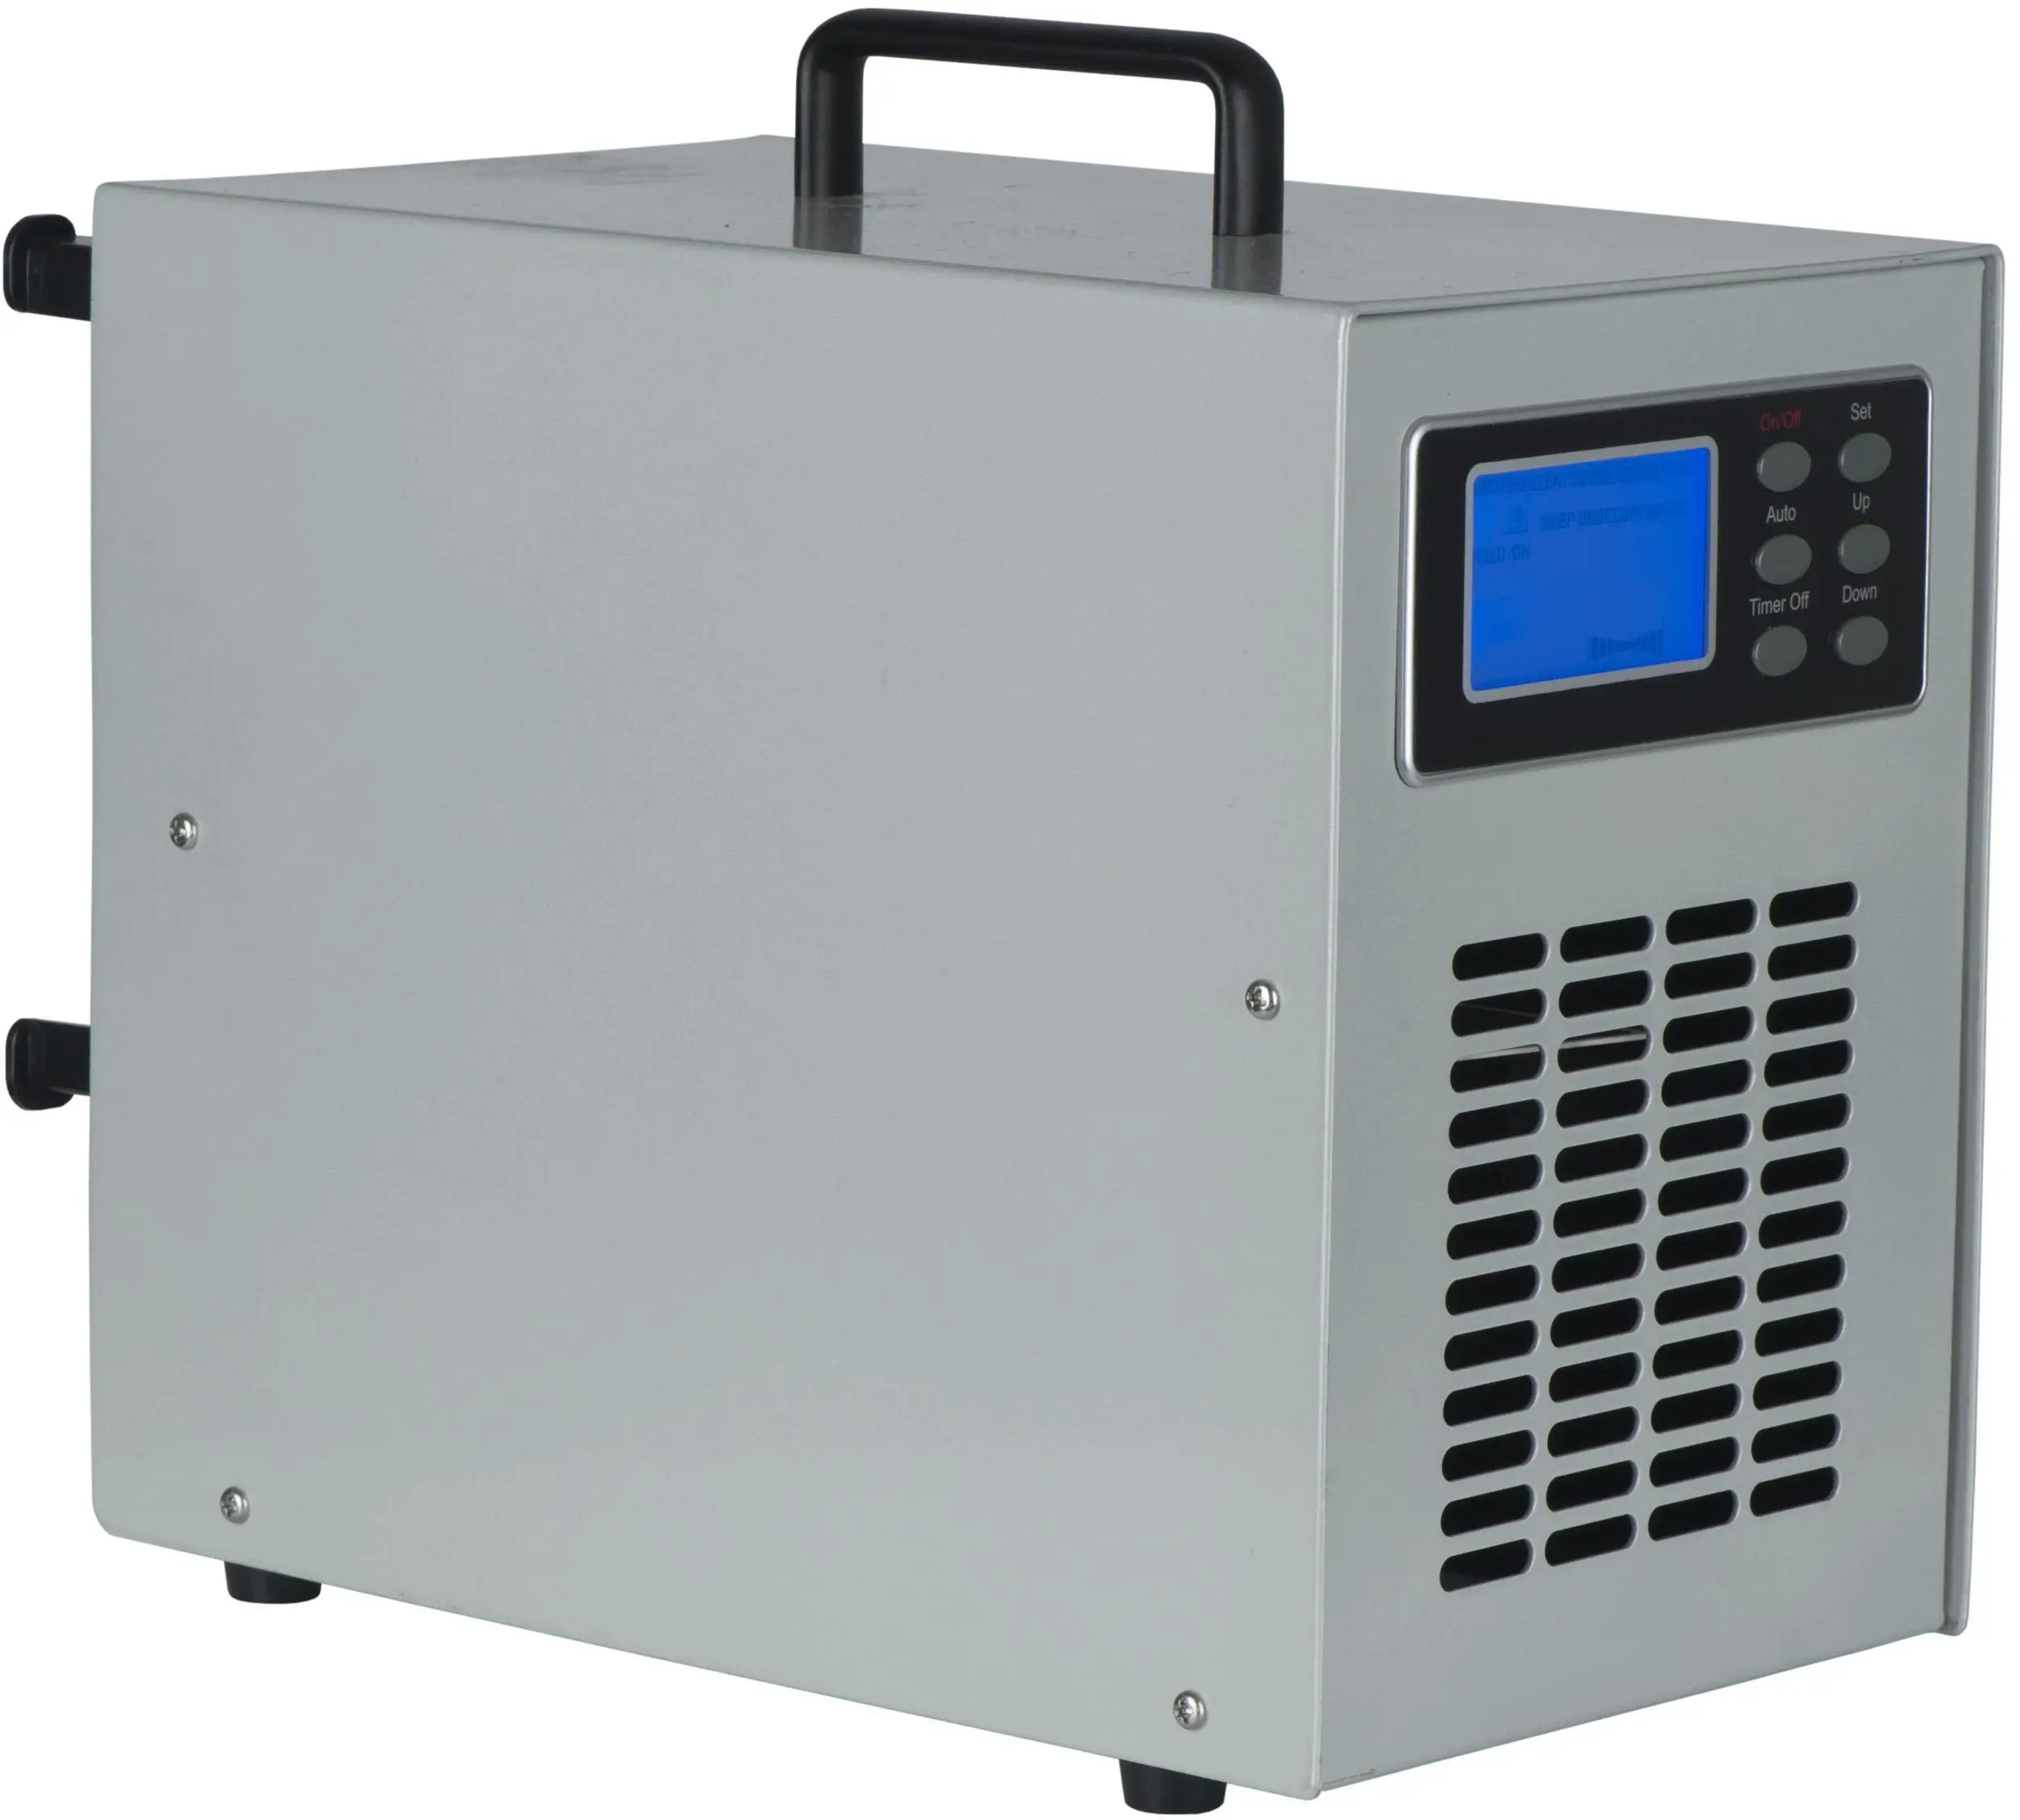 New Commercial Industrial Ozone Generator Pro Air Purifier ...